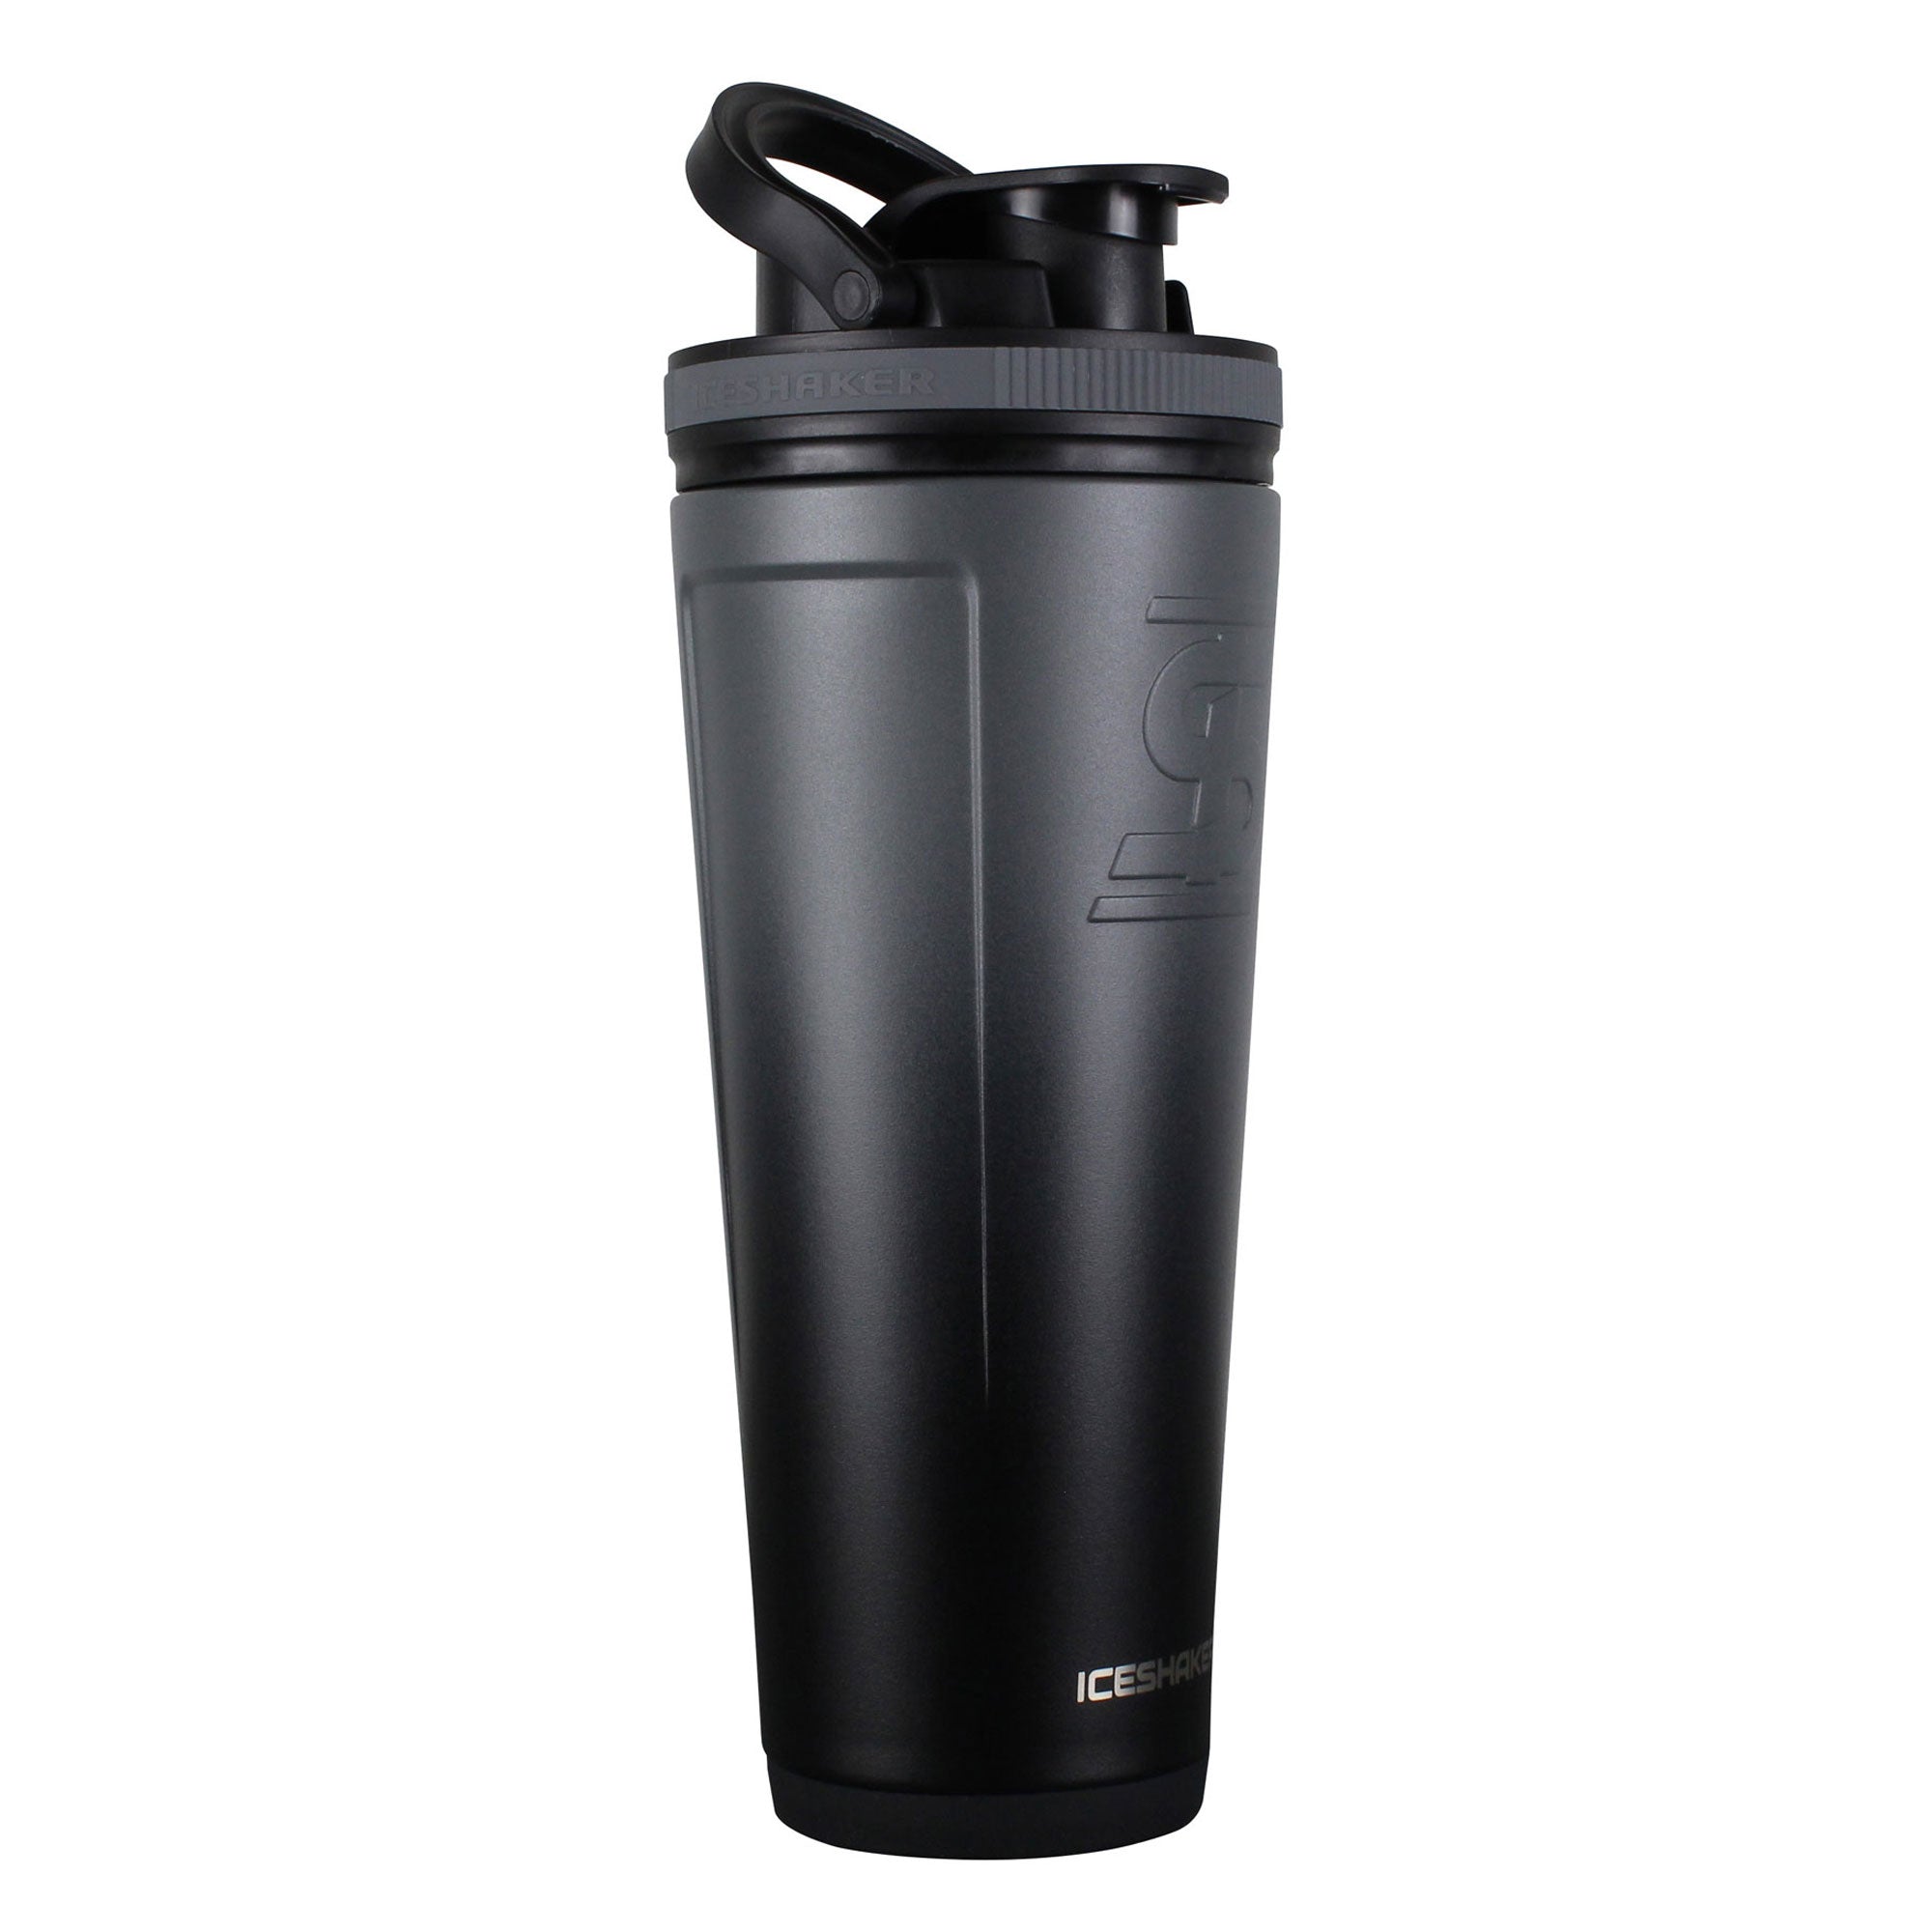  D.Y.A 12 Ounce Round Polypropylene Stainless Steel Protein  Shaker Bottle : Home & Kitchen